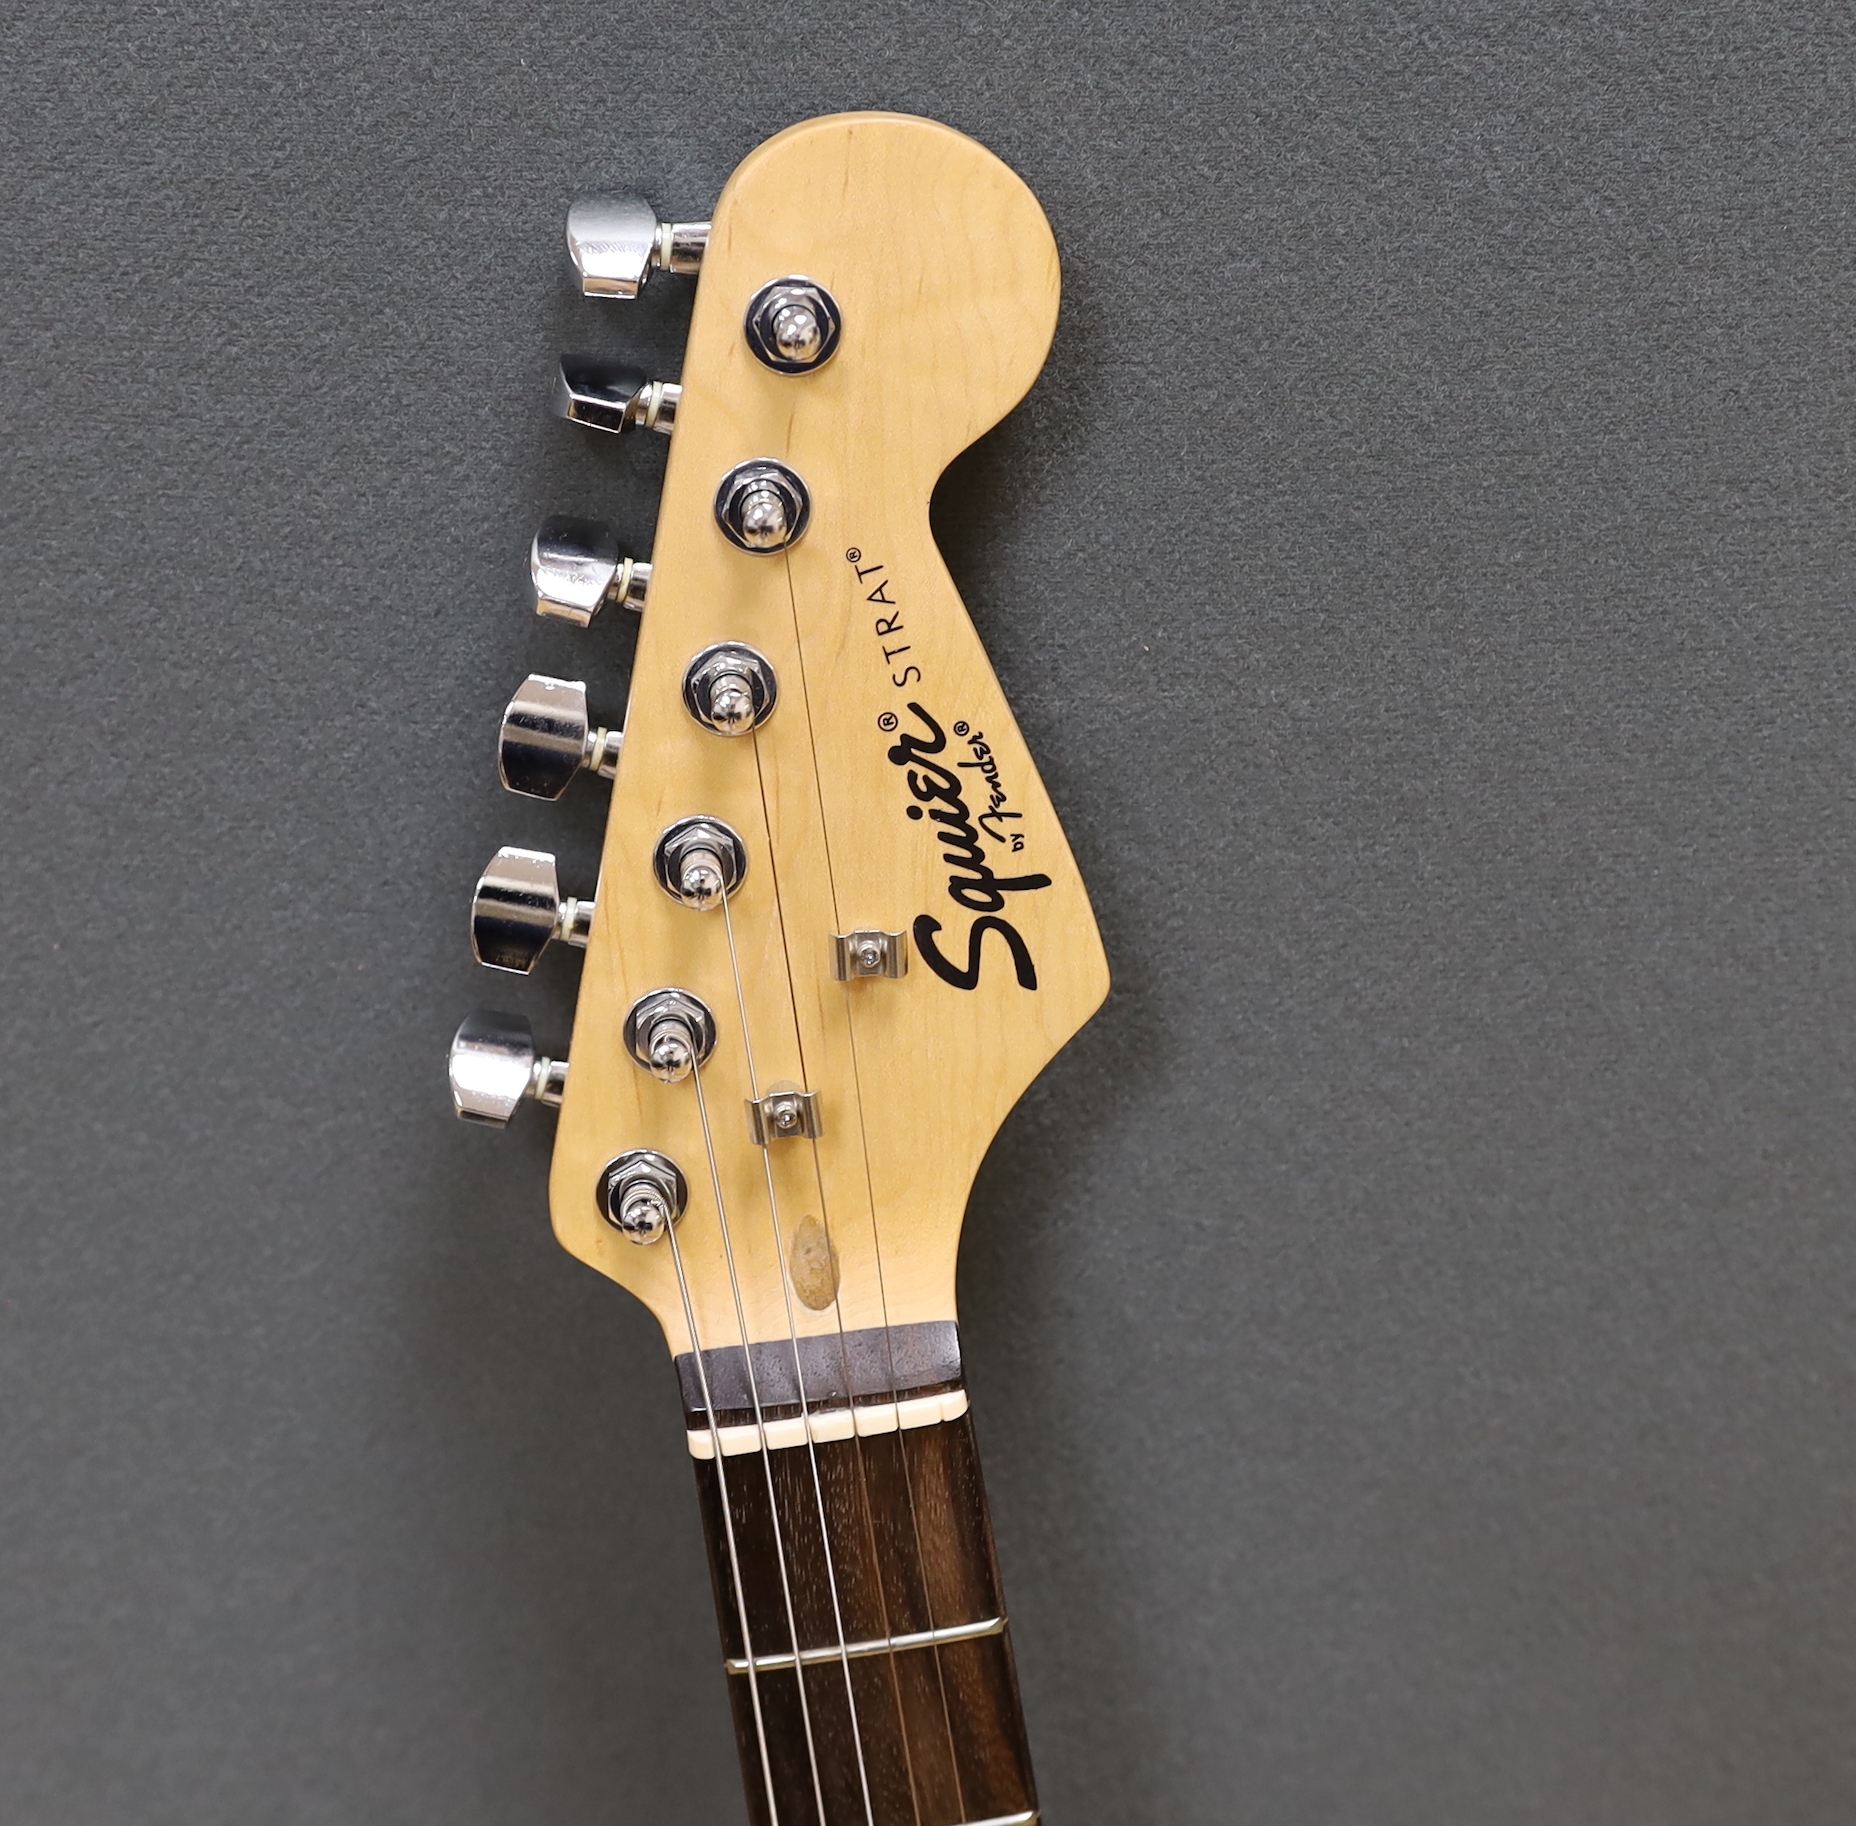 A Squier Strat by Fender Sunburst electric guitar made in China with rosewood neck, together with a small Squire SP-10 amp